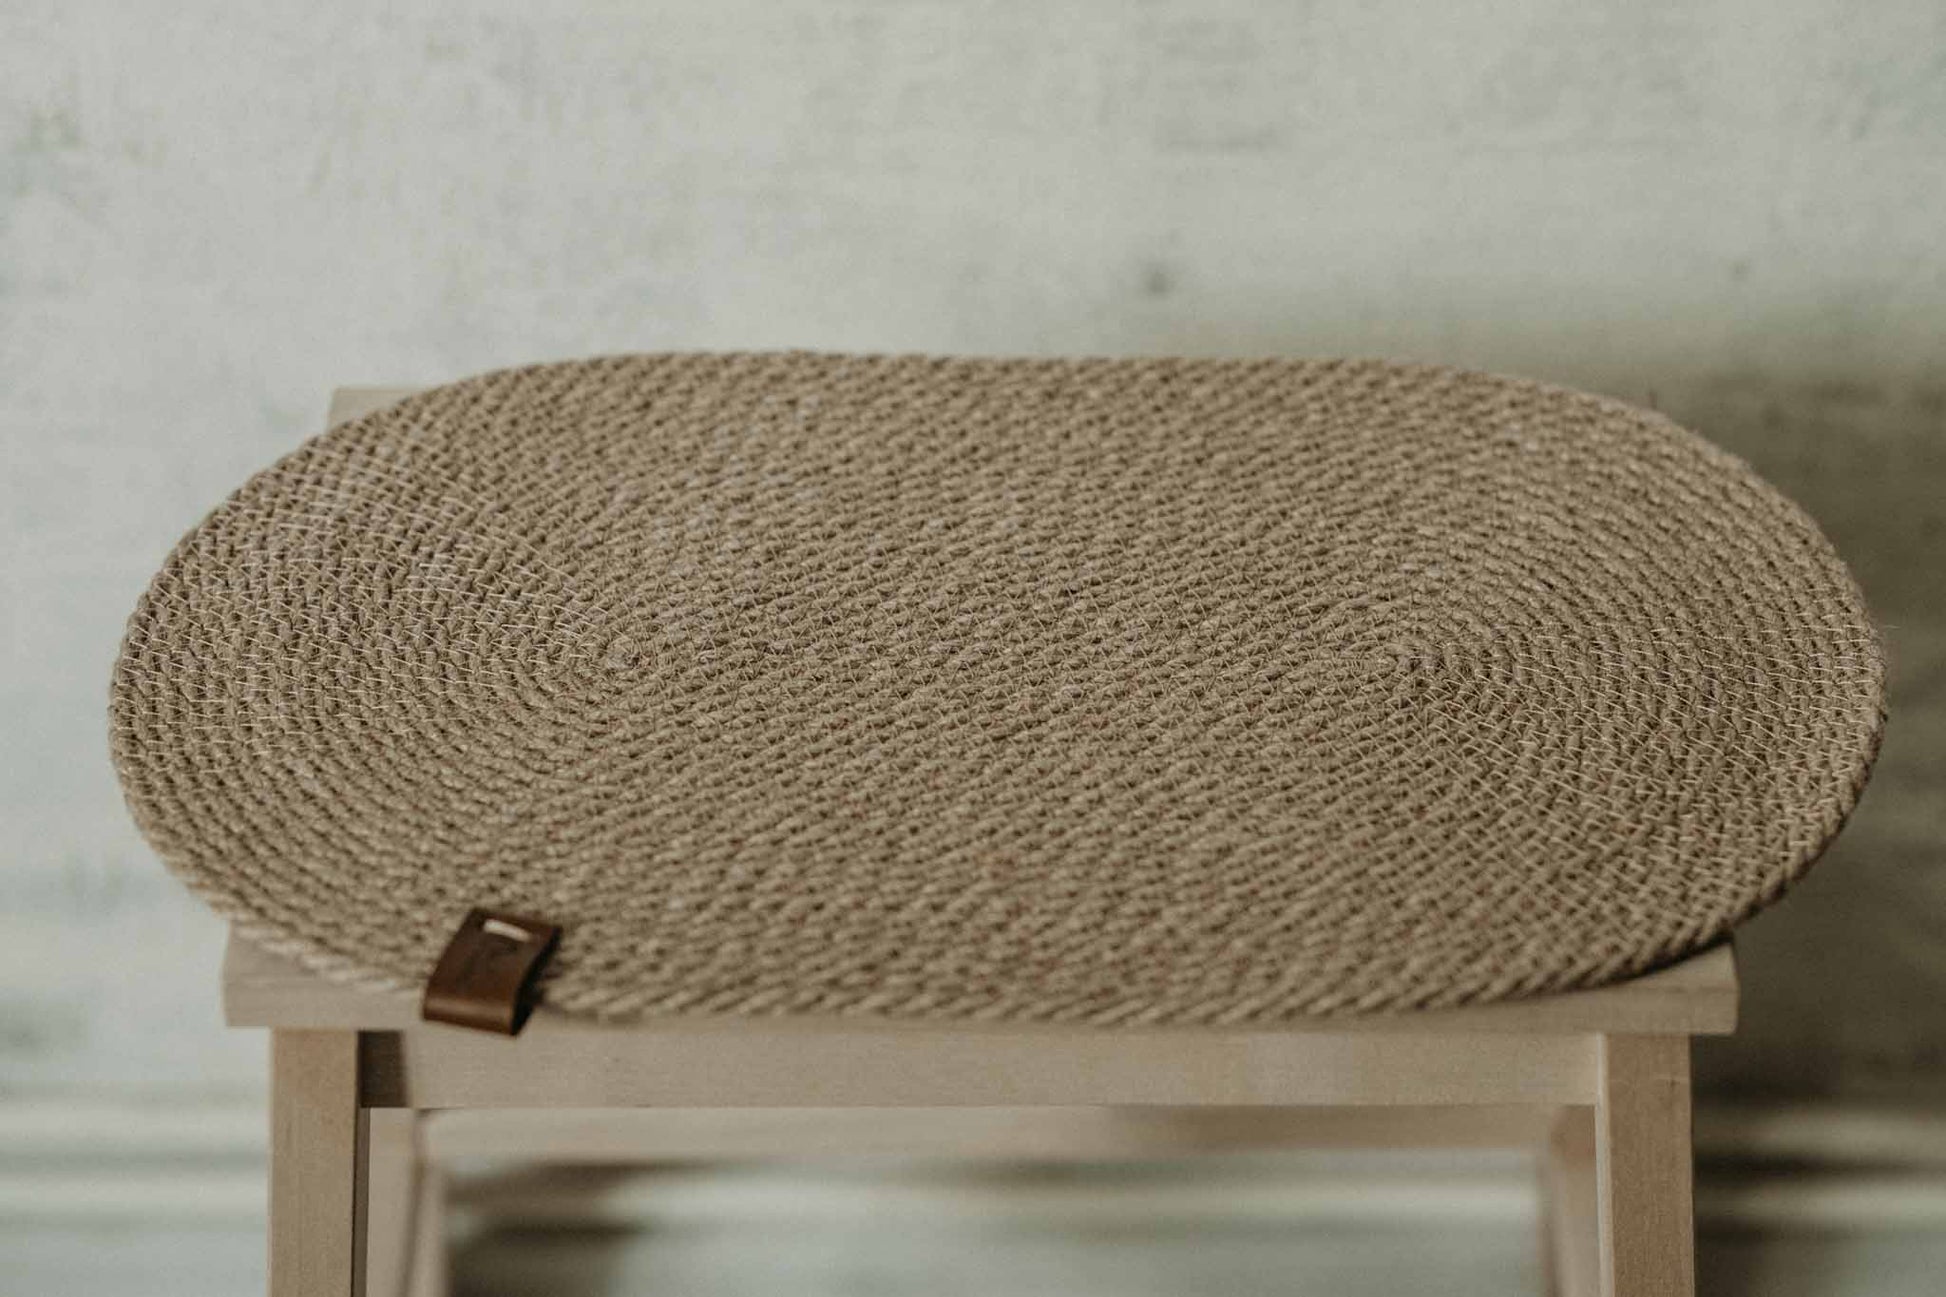 Coordinating jute mat - 45 x 26 cm - adds a touch of natural charm to your pet's dining area.